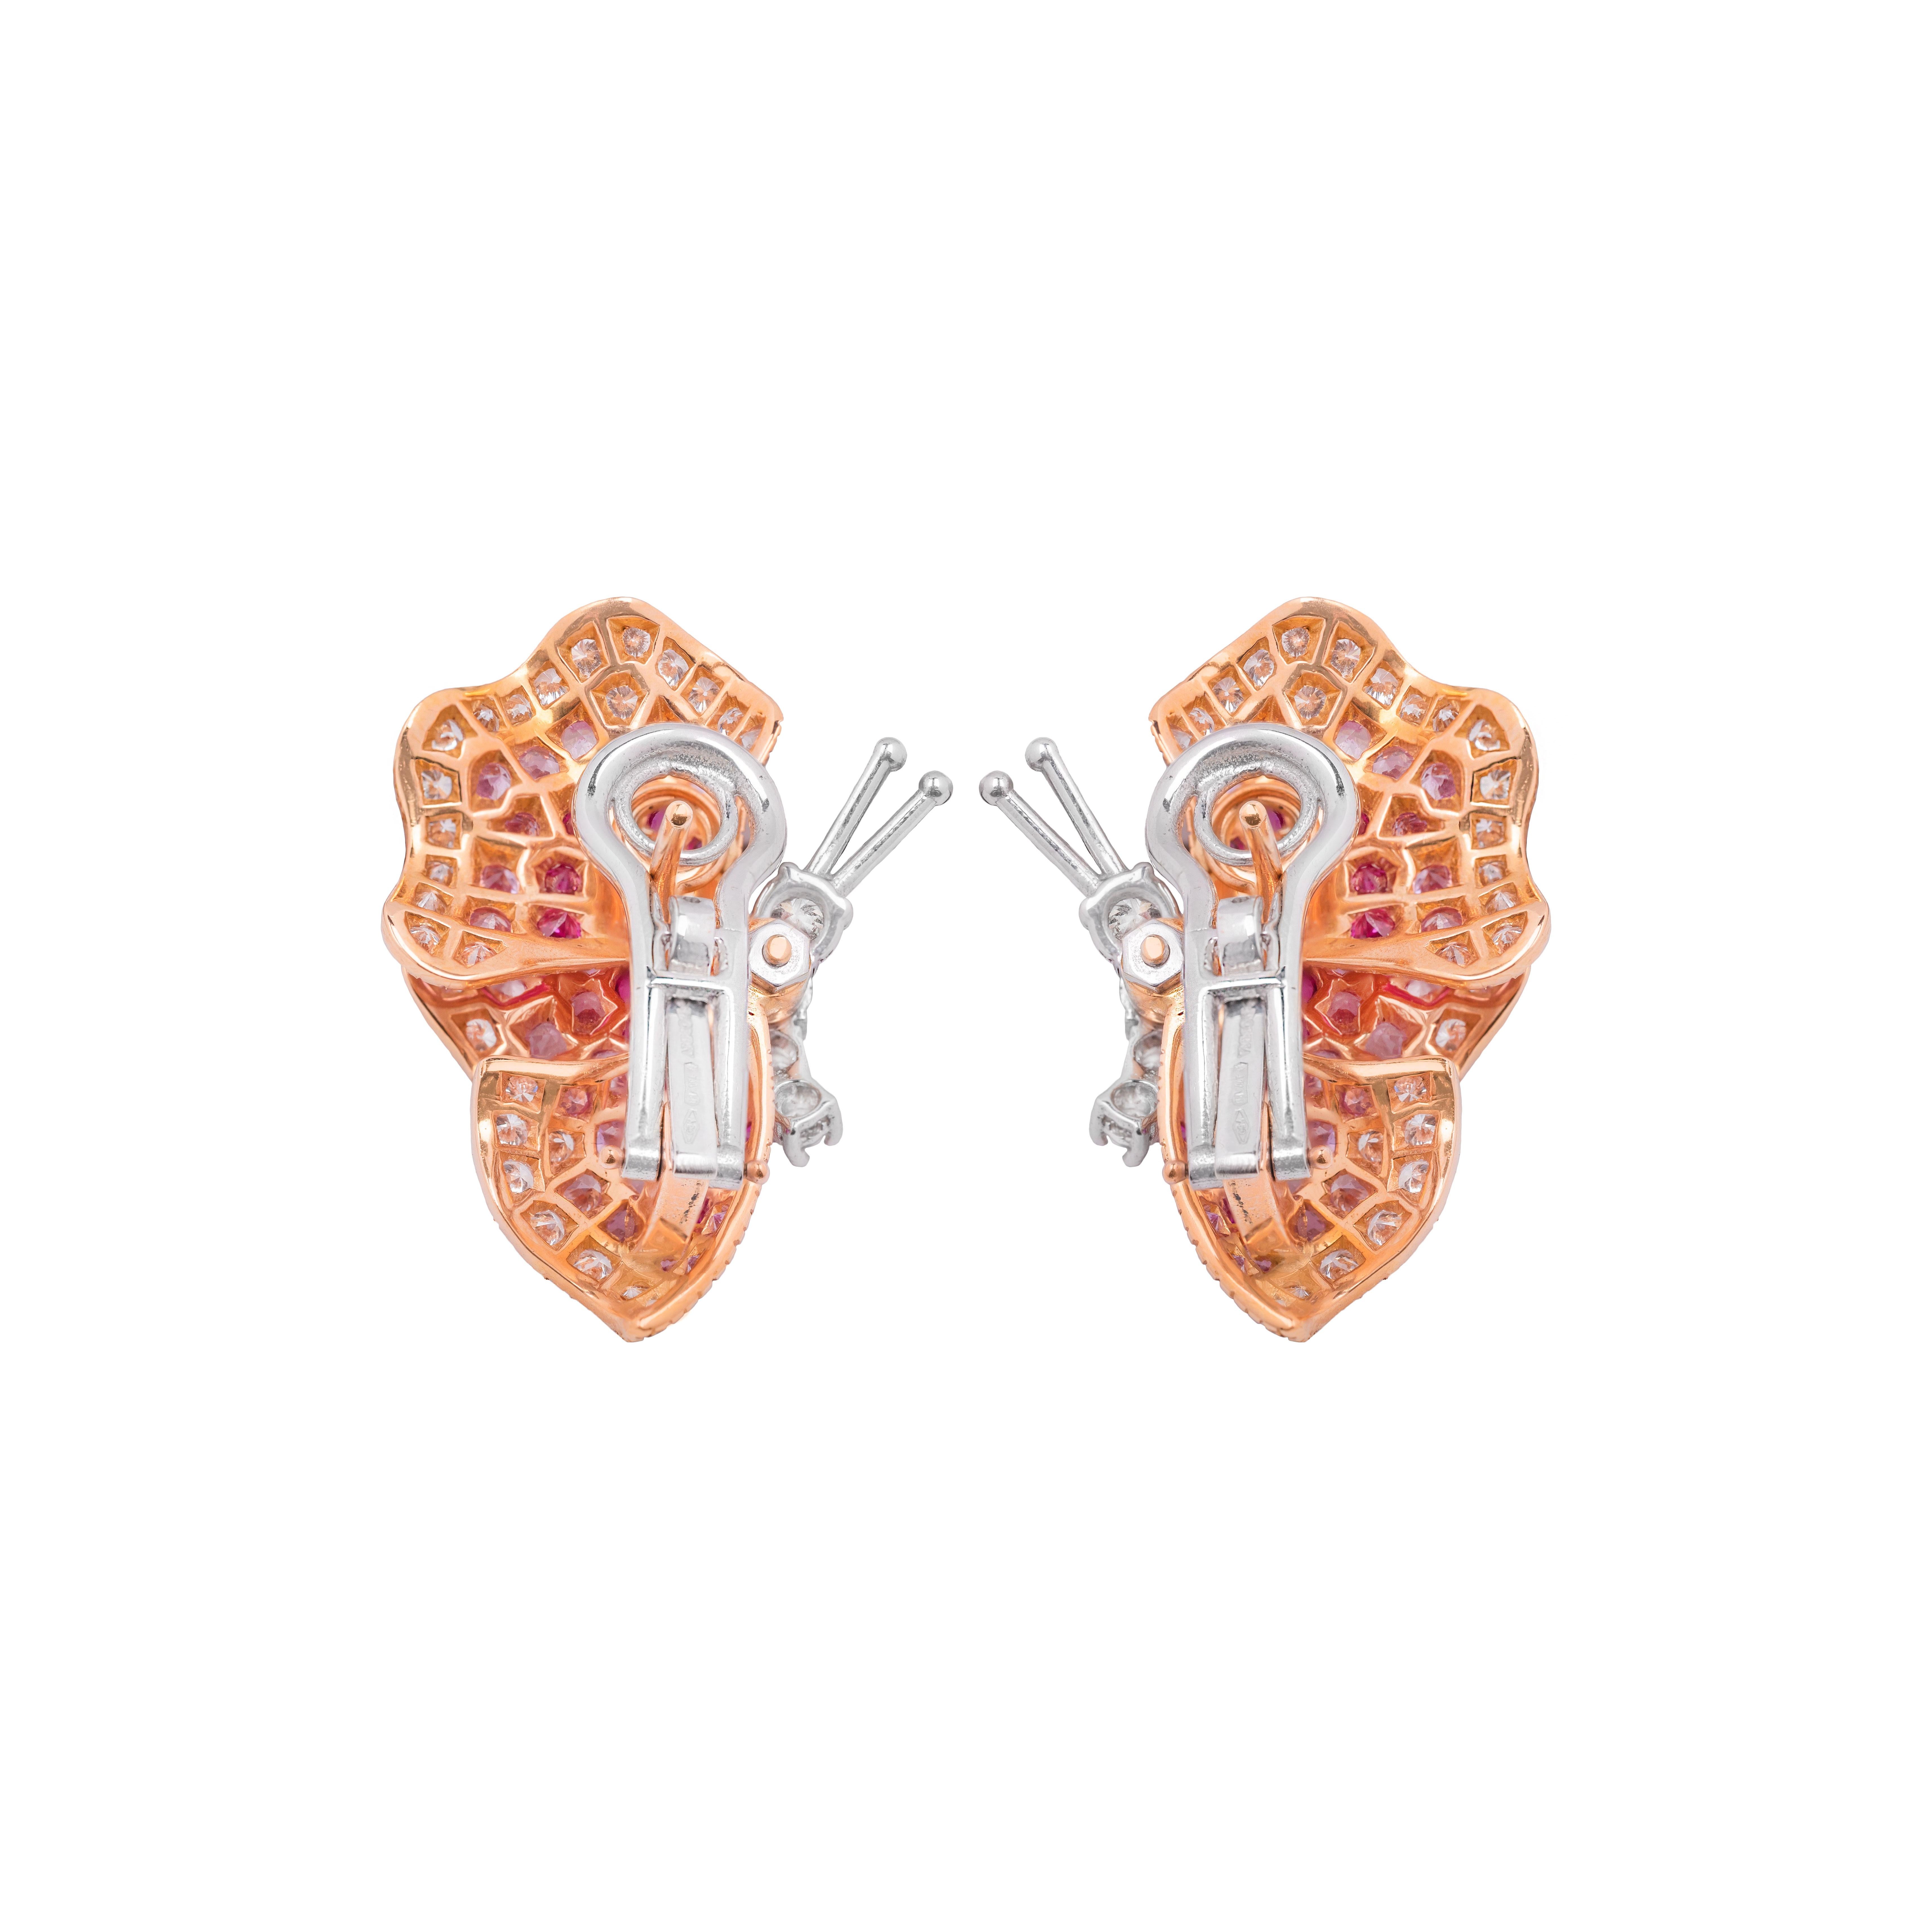 These bright earrings are made in Italy by Fanuele Gioielli. 
Each 18k rose gold earrings features four brilliant cut white diamonds as body, the wings instead are covered by brilliant cut pink sapphires with shades from light pink to dark pink and